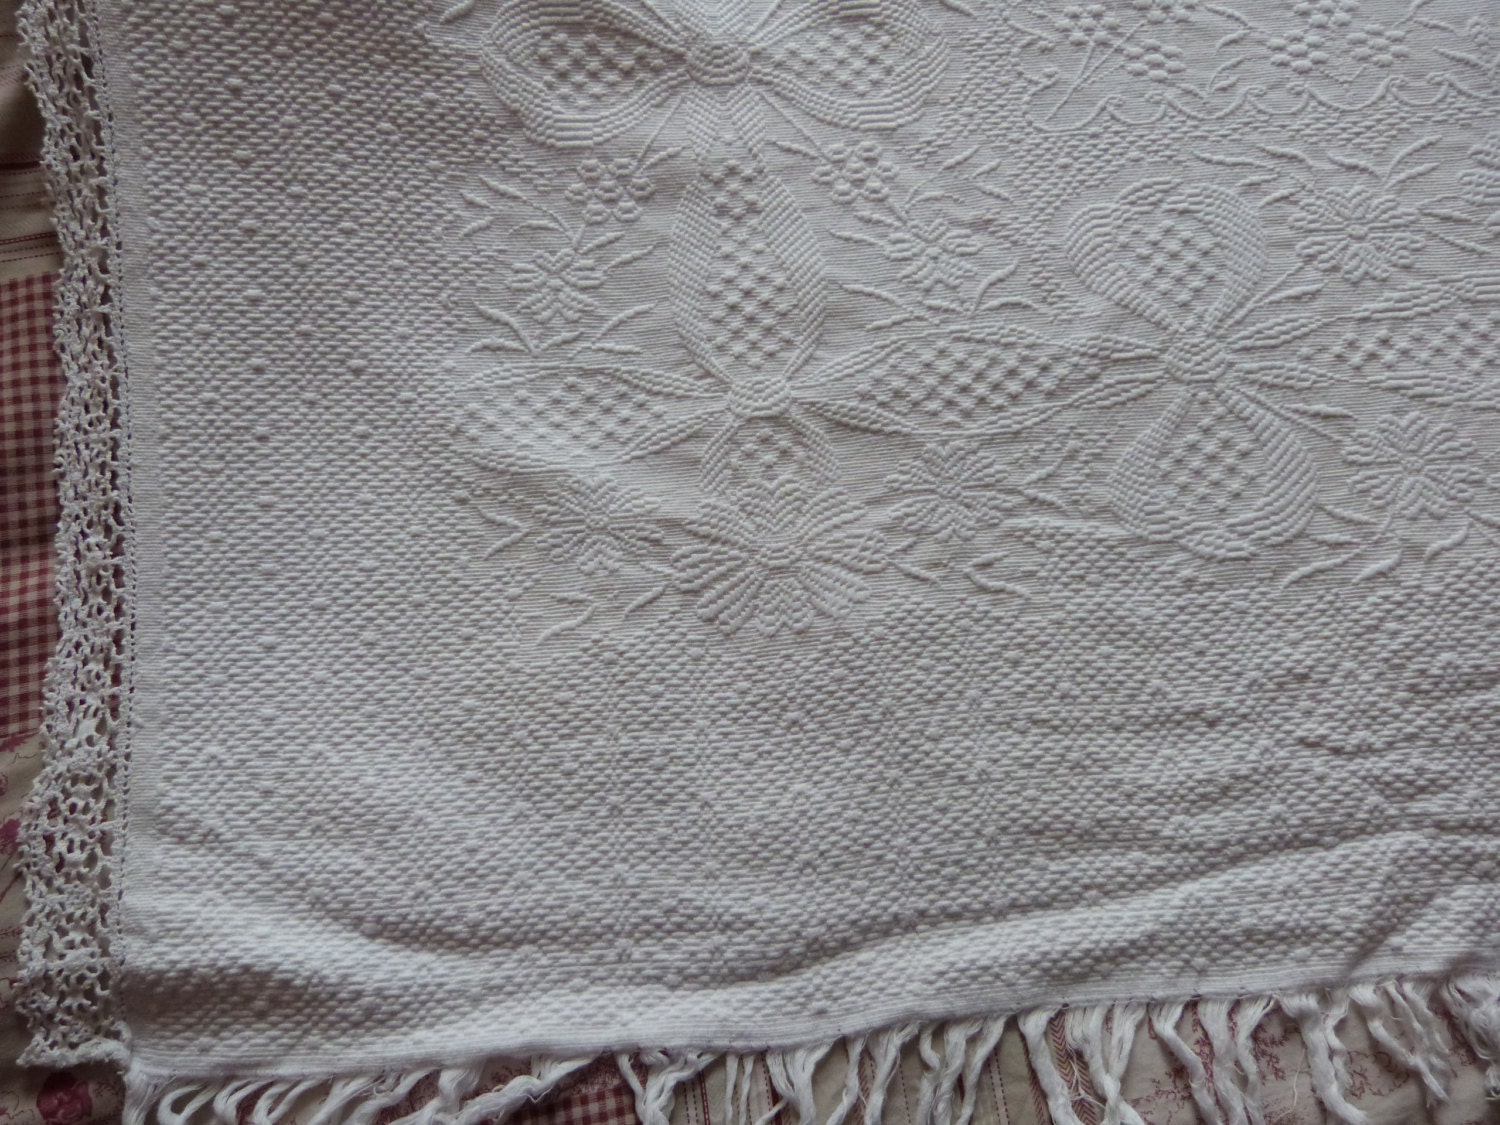 Antique French Provencal quilted cotton bedspread throw quilt